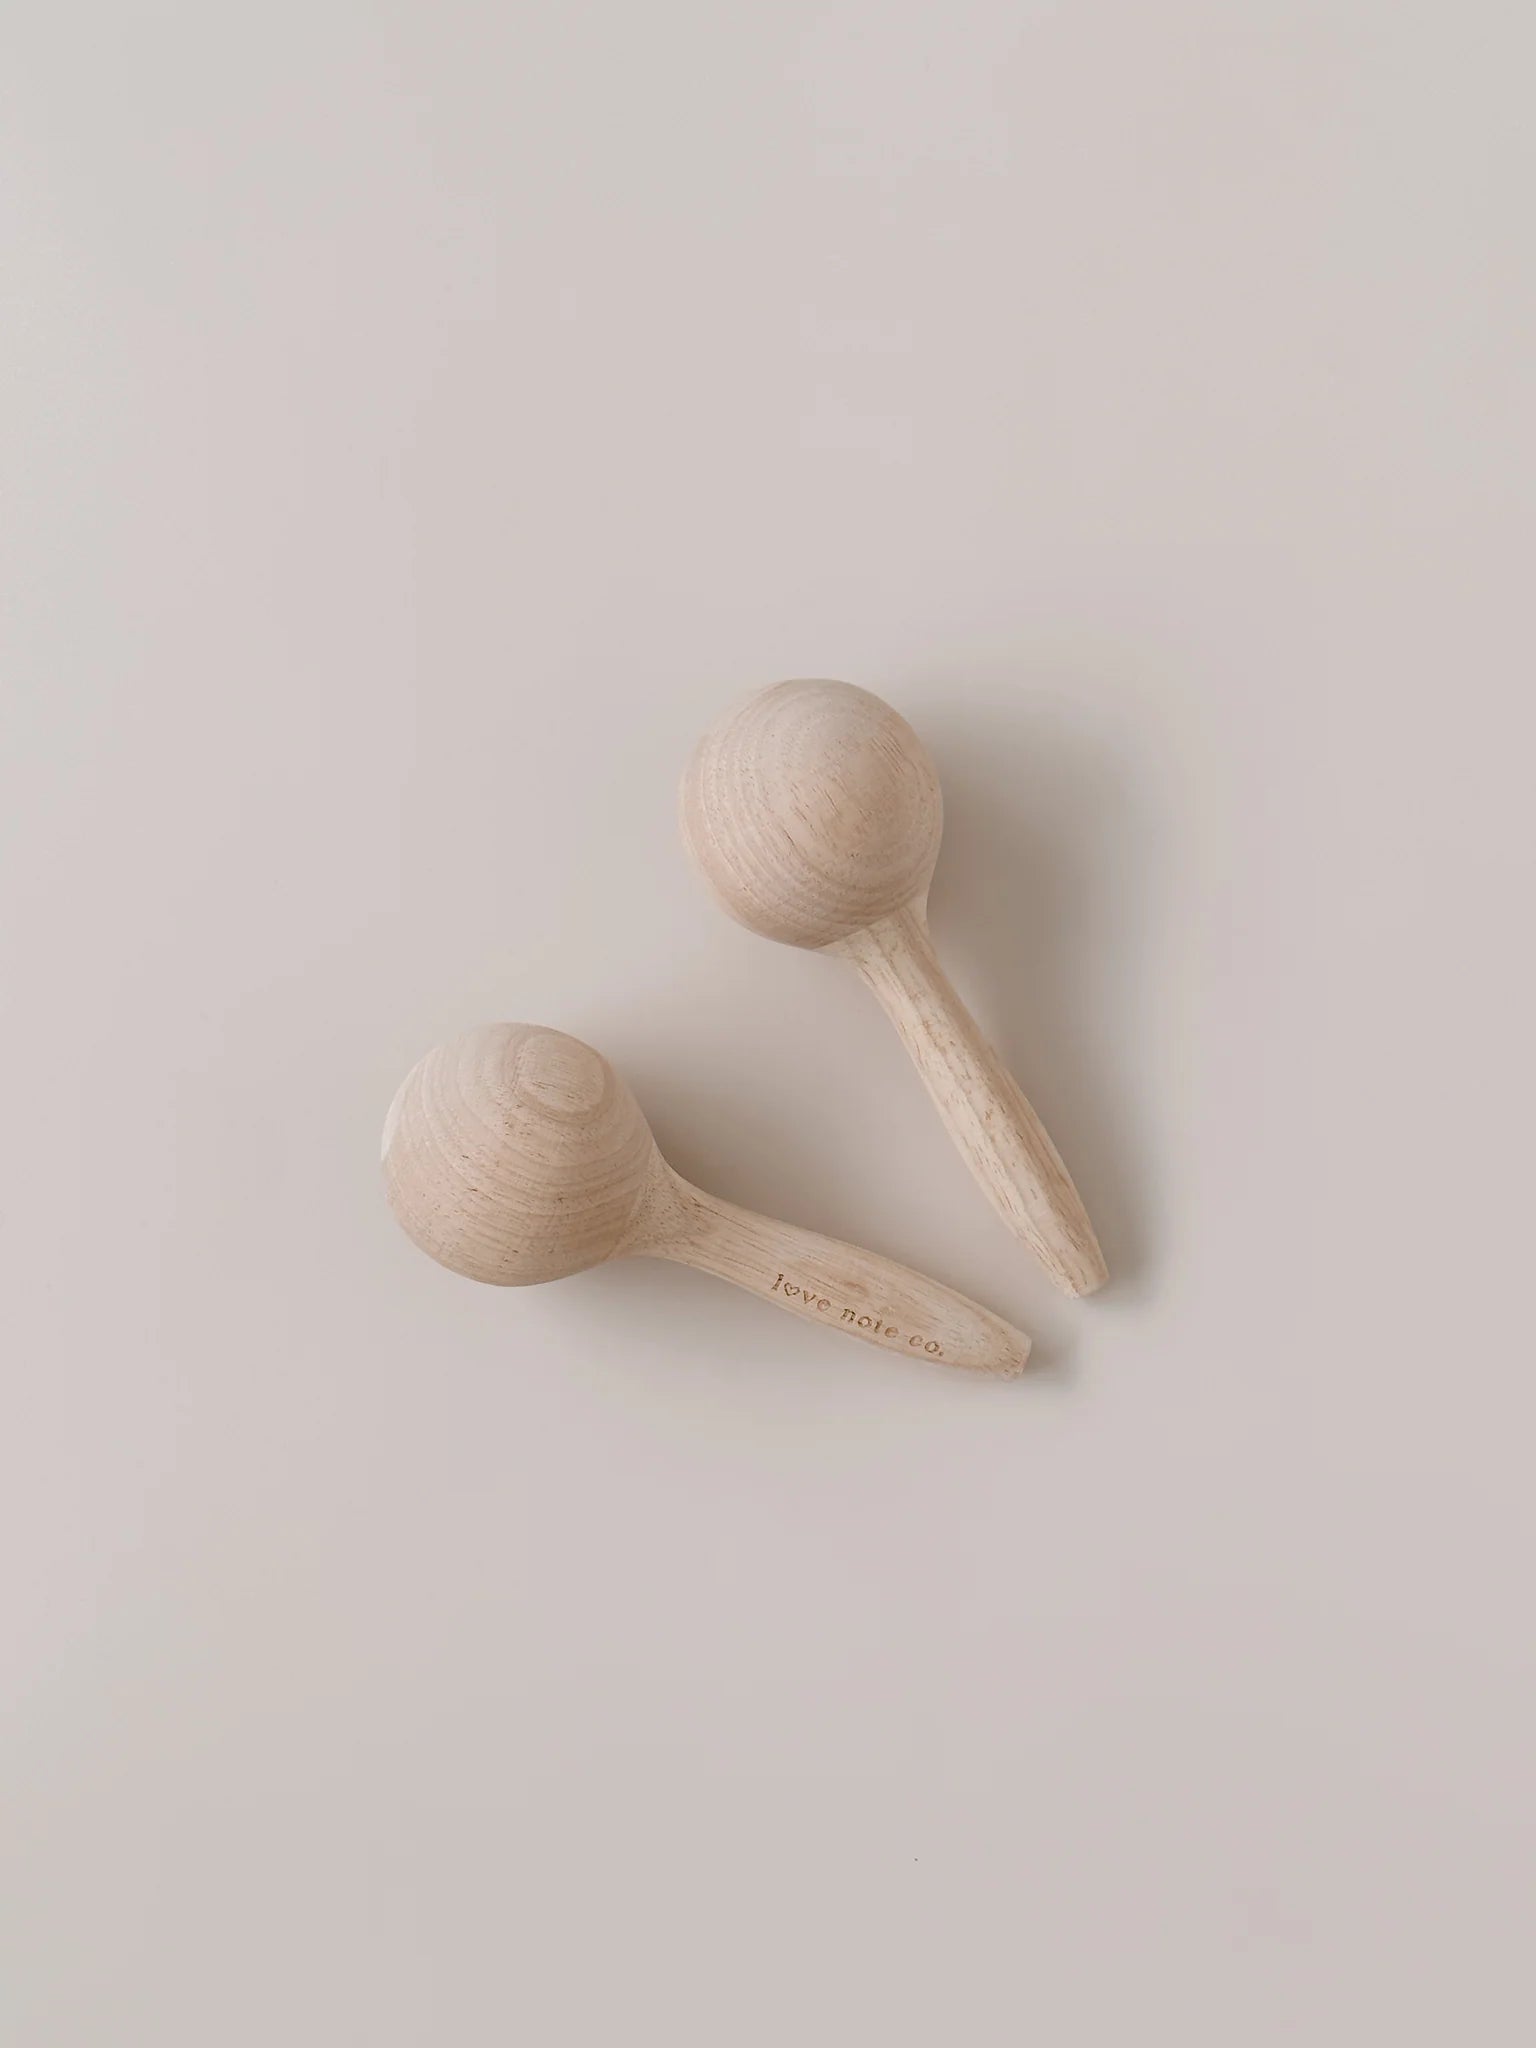 Maracas by Love Note Co - Musical toys for Kids